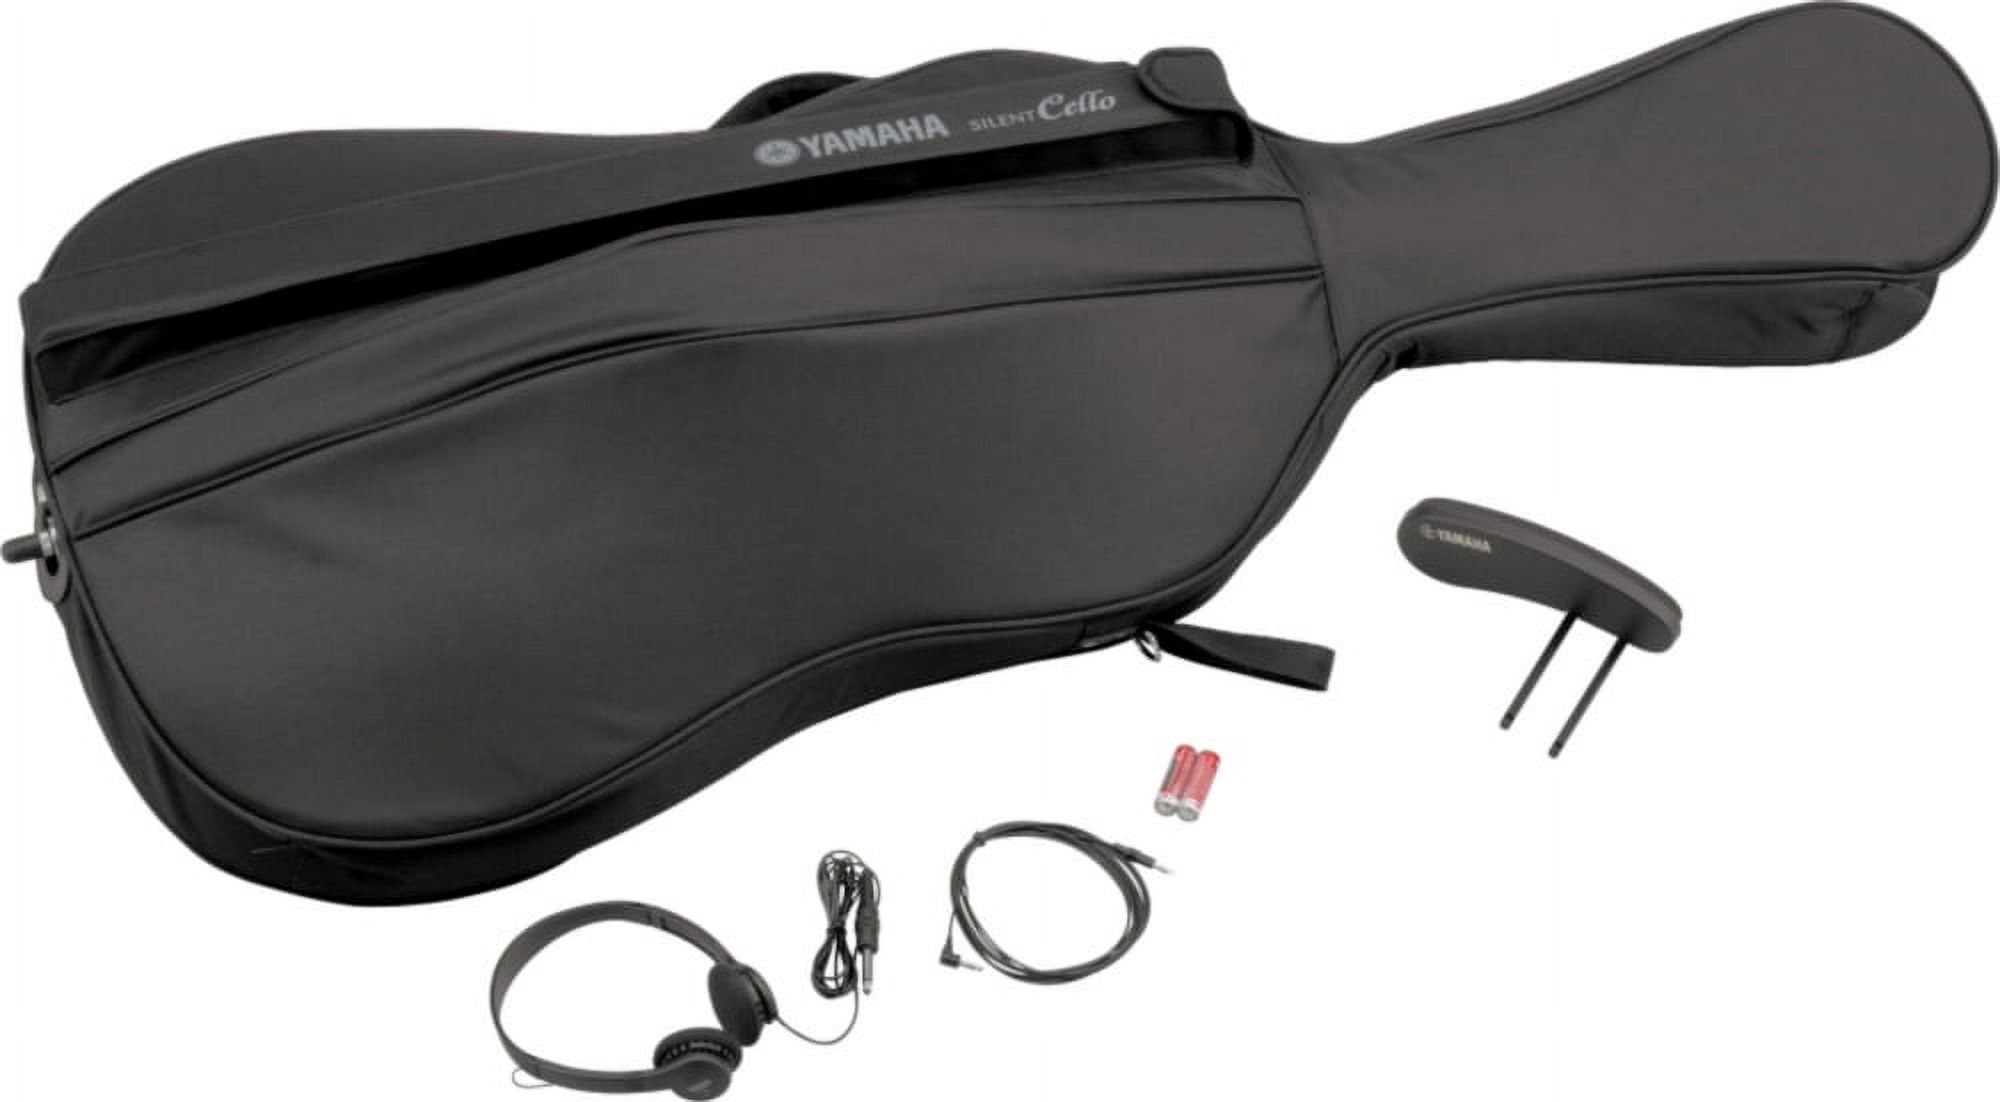 SVC110 Silent Electric Cello - image 2 of 3